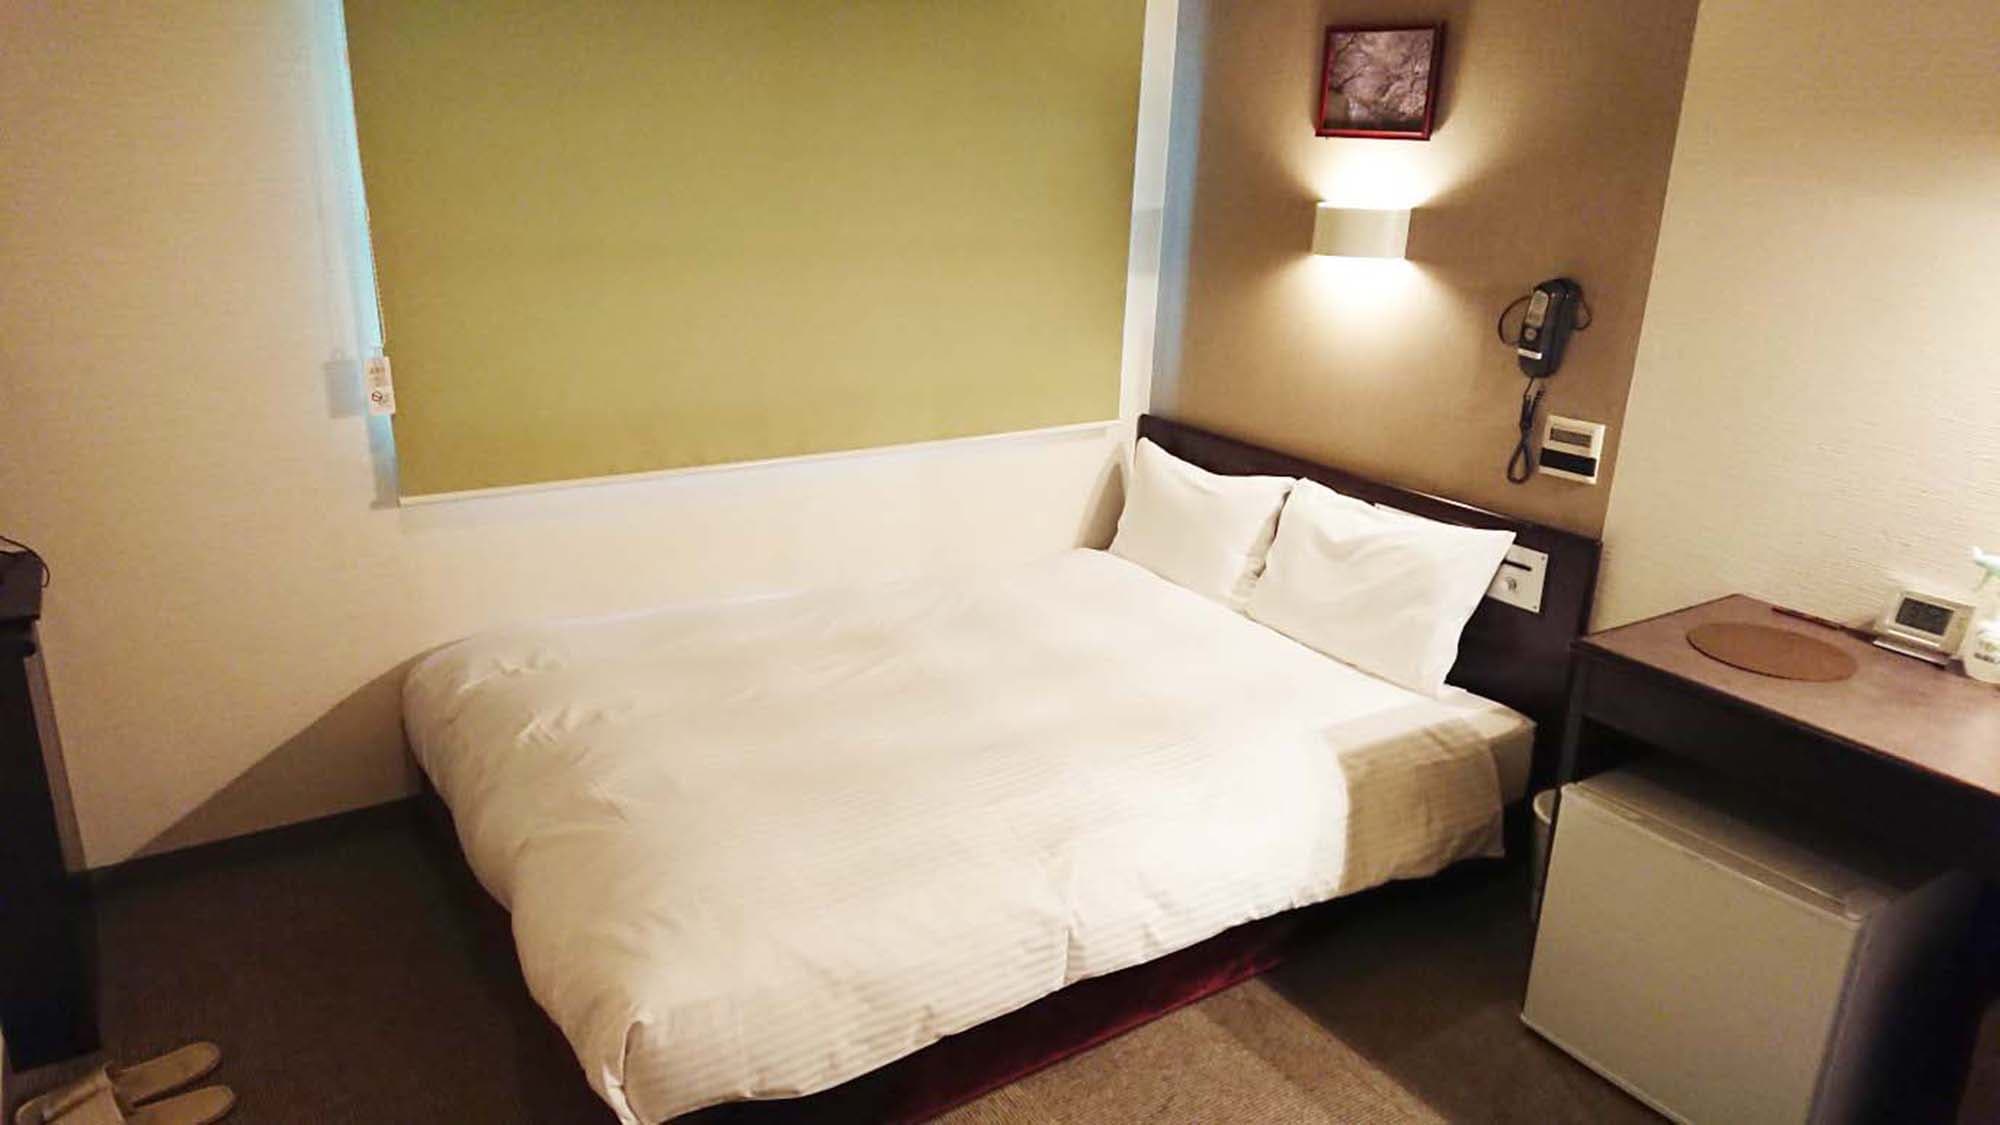 ・ [Example of semi-double room] Recommended for couples and couples